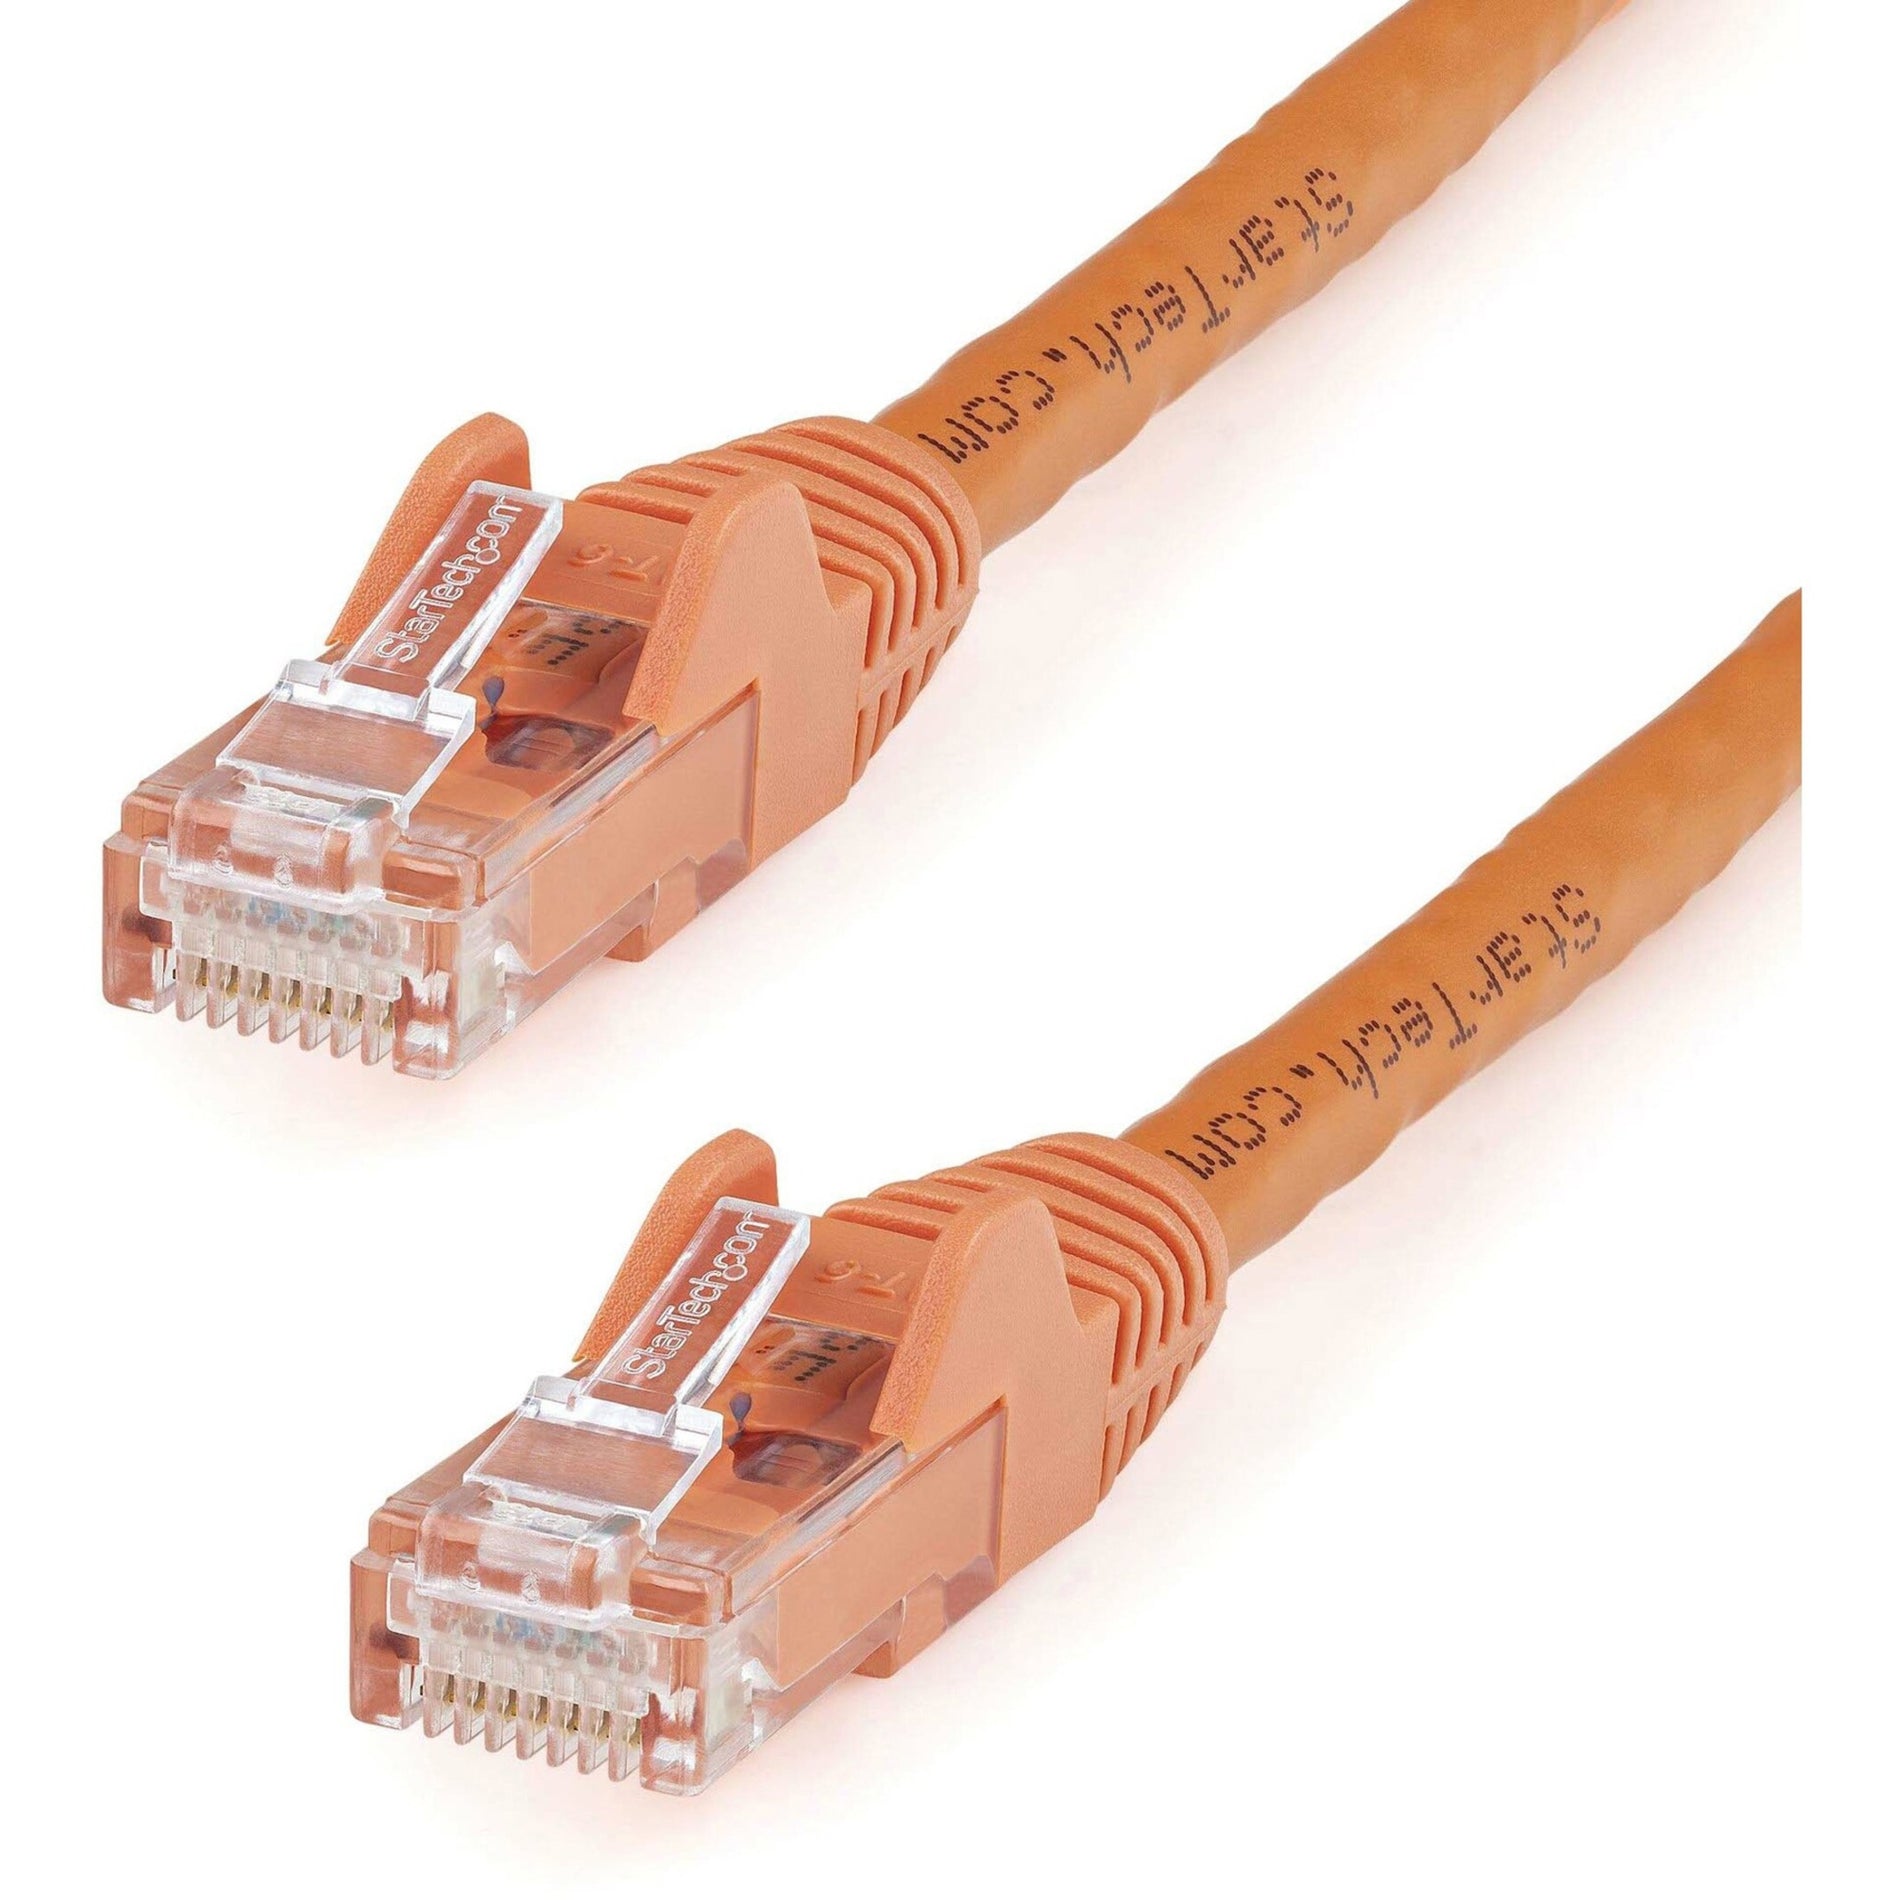 StarTech.com N6PATCH75OR 75 ft. Cat6 Patch Cable - Orange, Lifetime Warranty, 10 Gbit/s Data Transfer Rate, Snagless, Rust Resistant